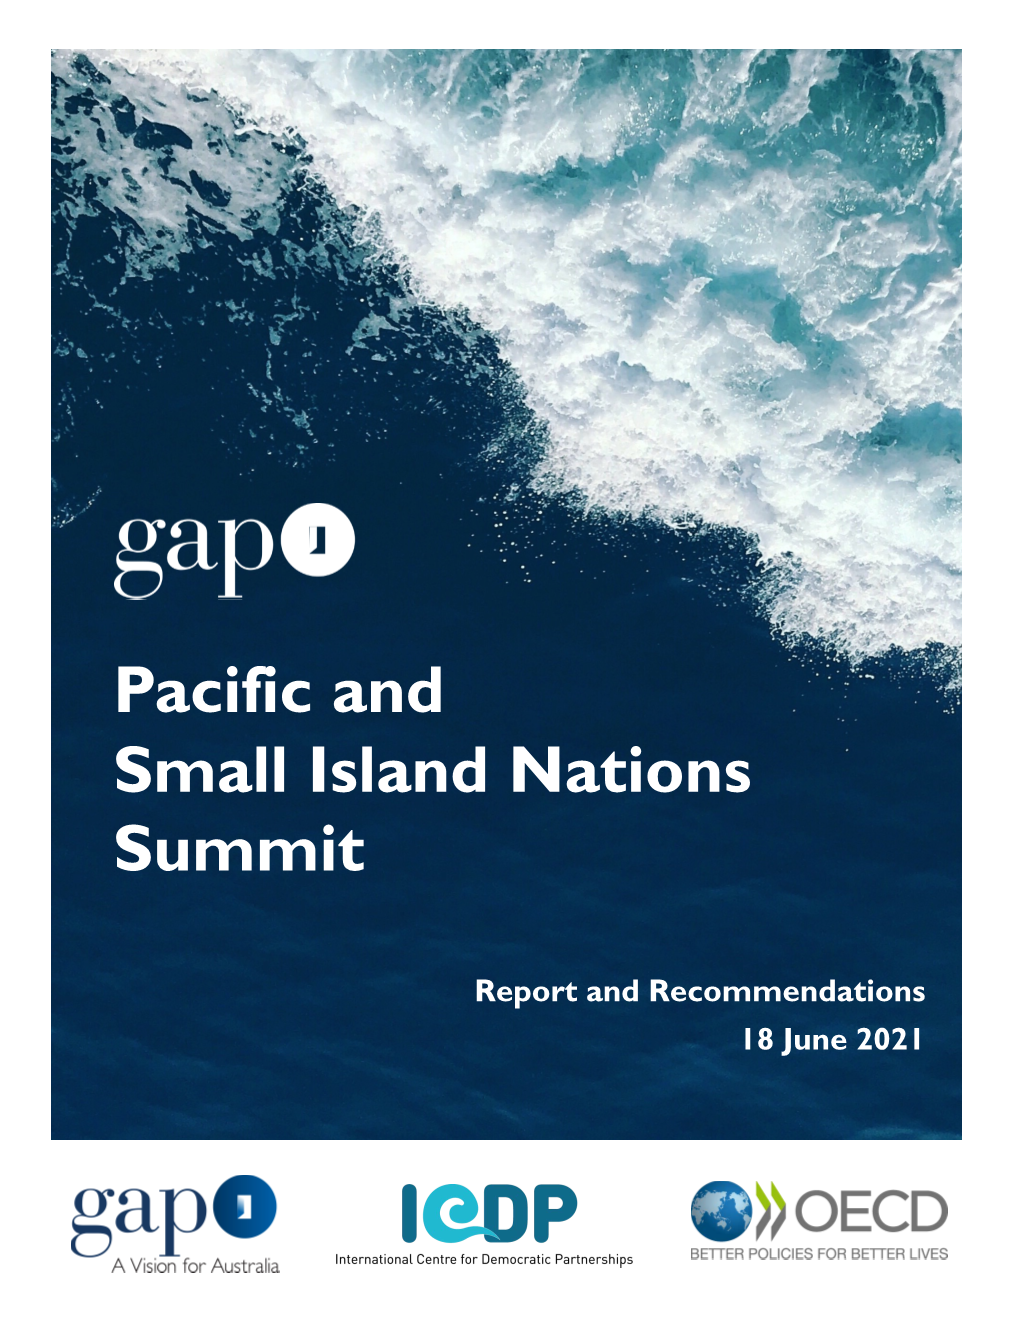 Pacific and Small Island Nations Summit Report Released